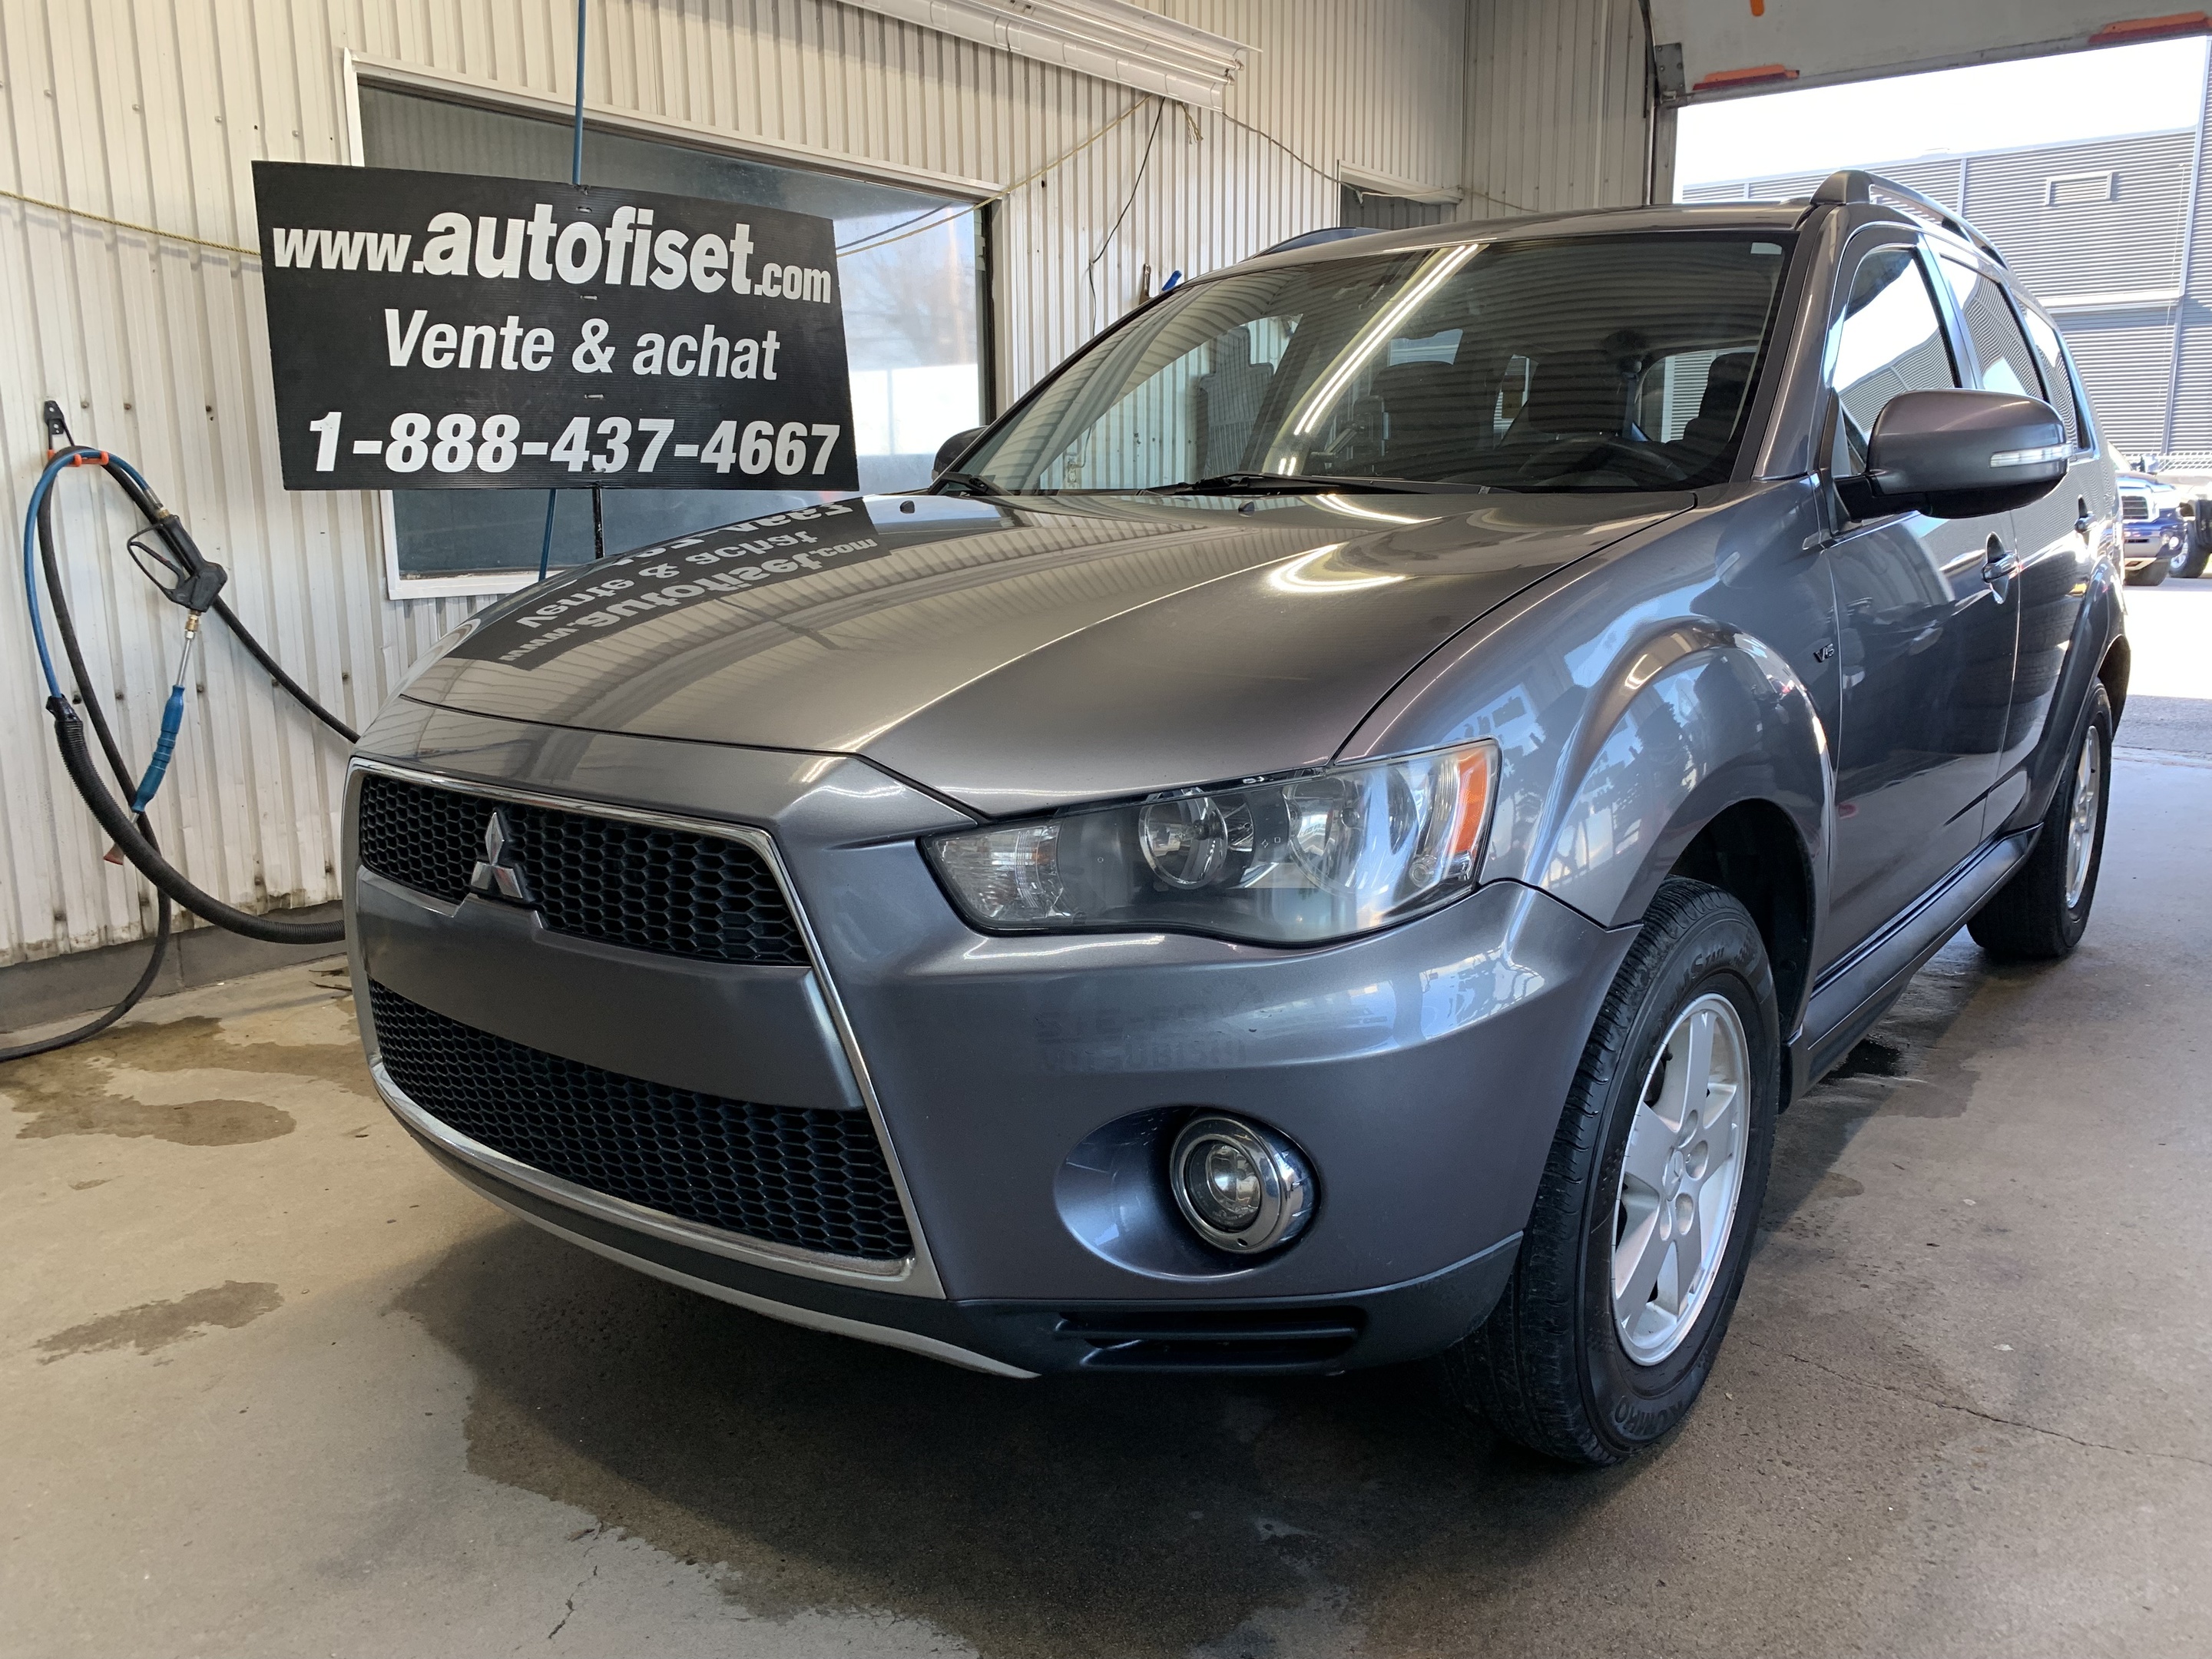 2012 Mitsubishi Outlander 7 passagers ,  stow' n go